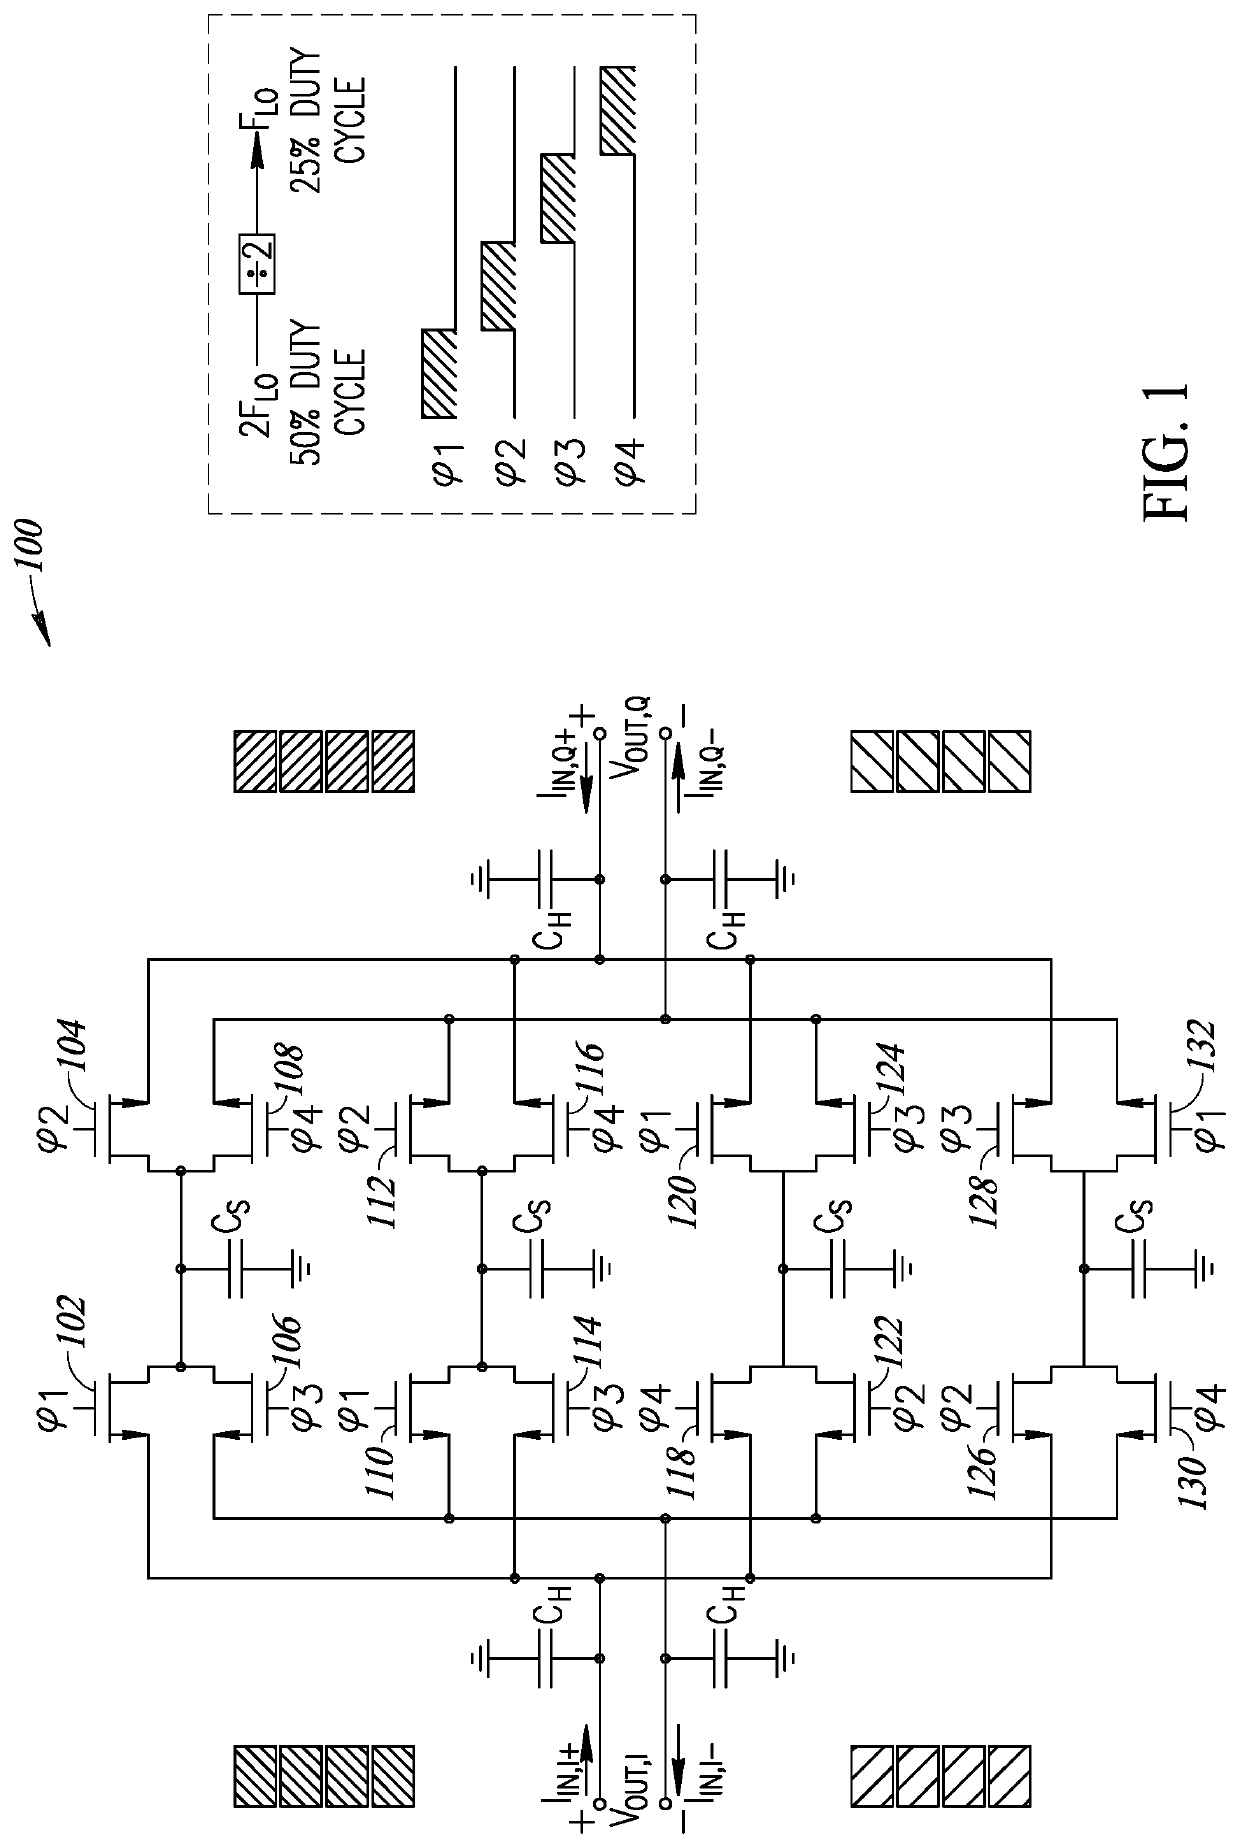 Discrete time charge sharing IIR bandpass filter incorporating clock phase reuse